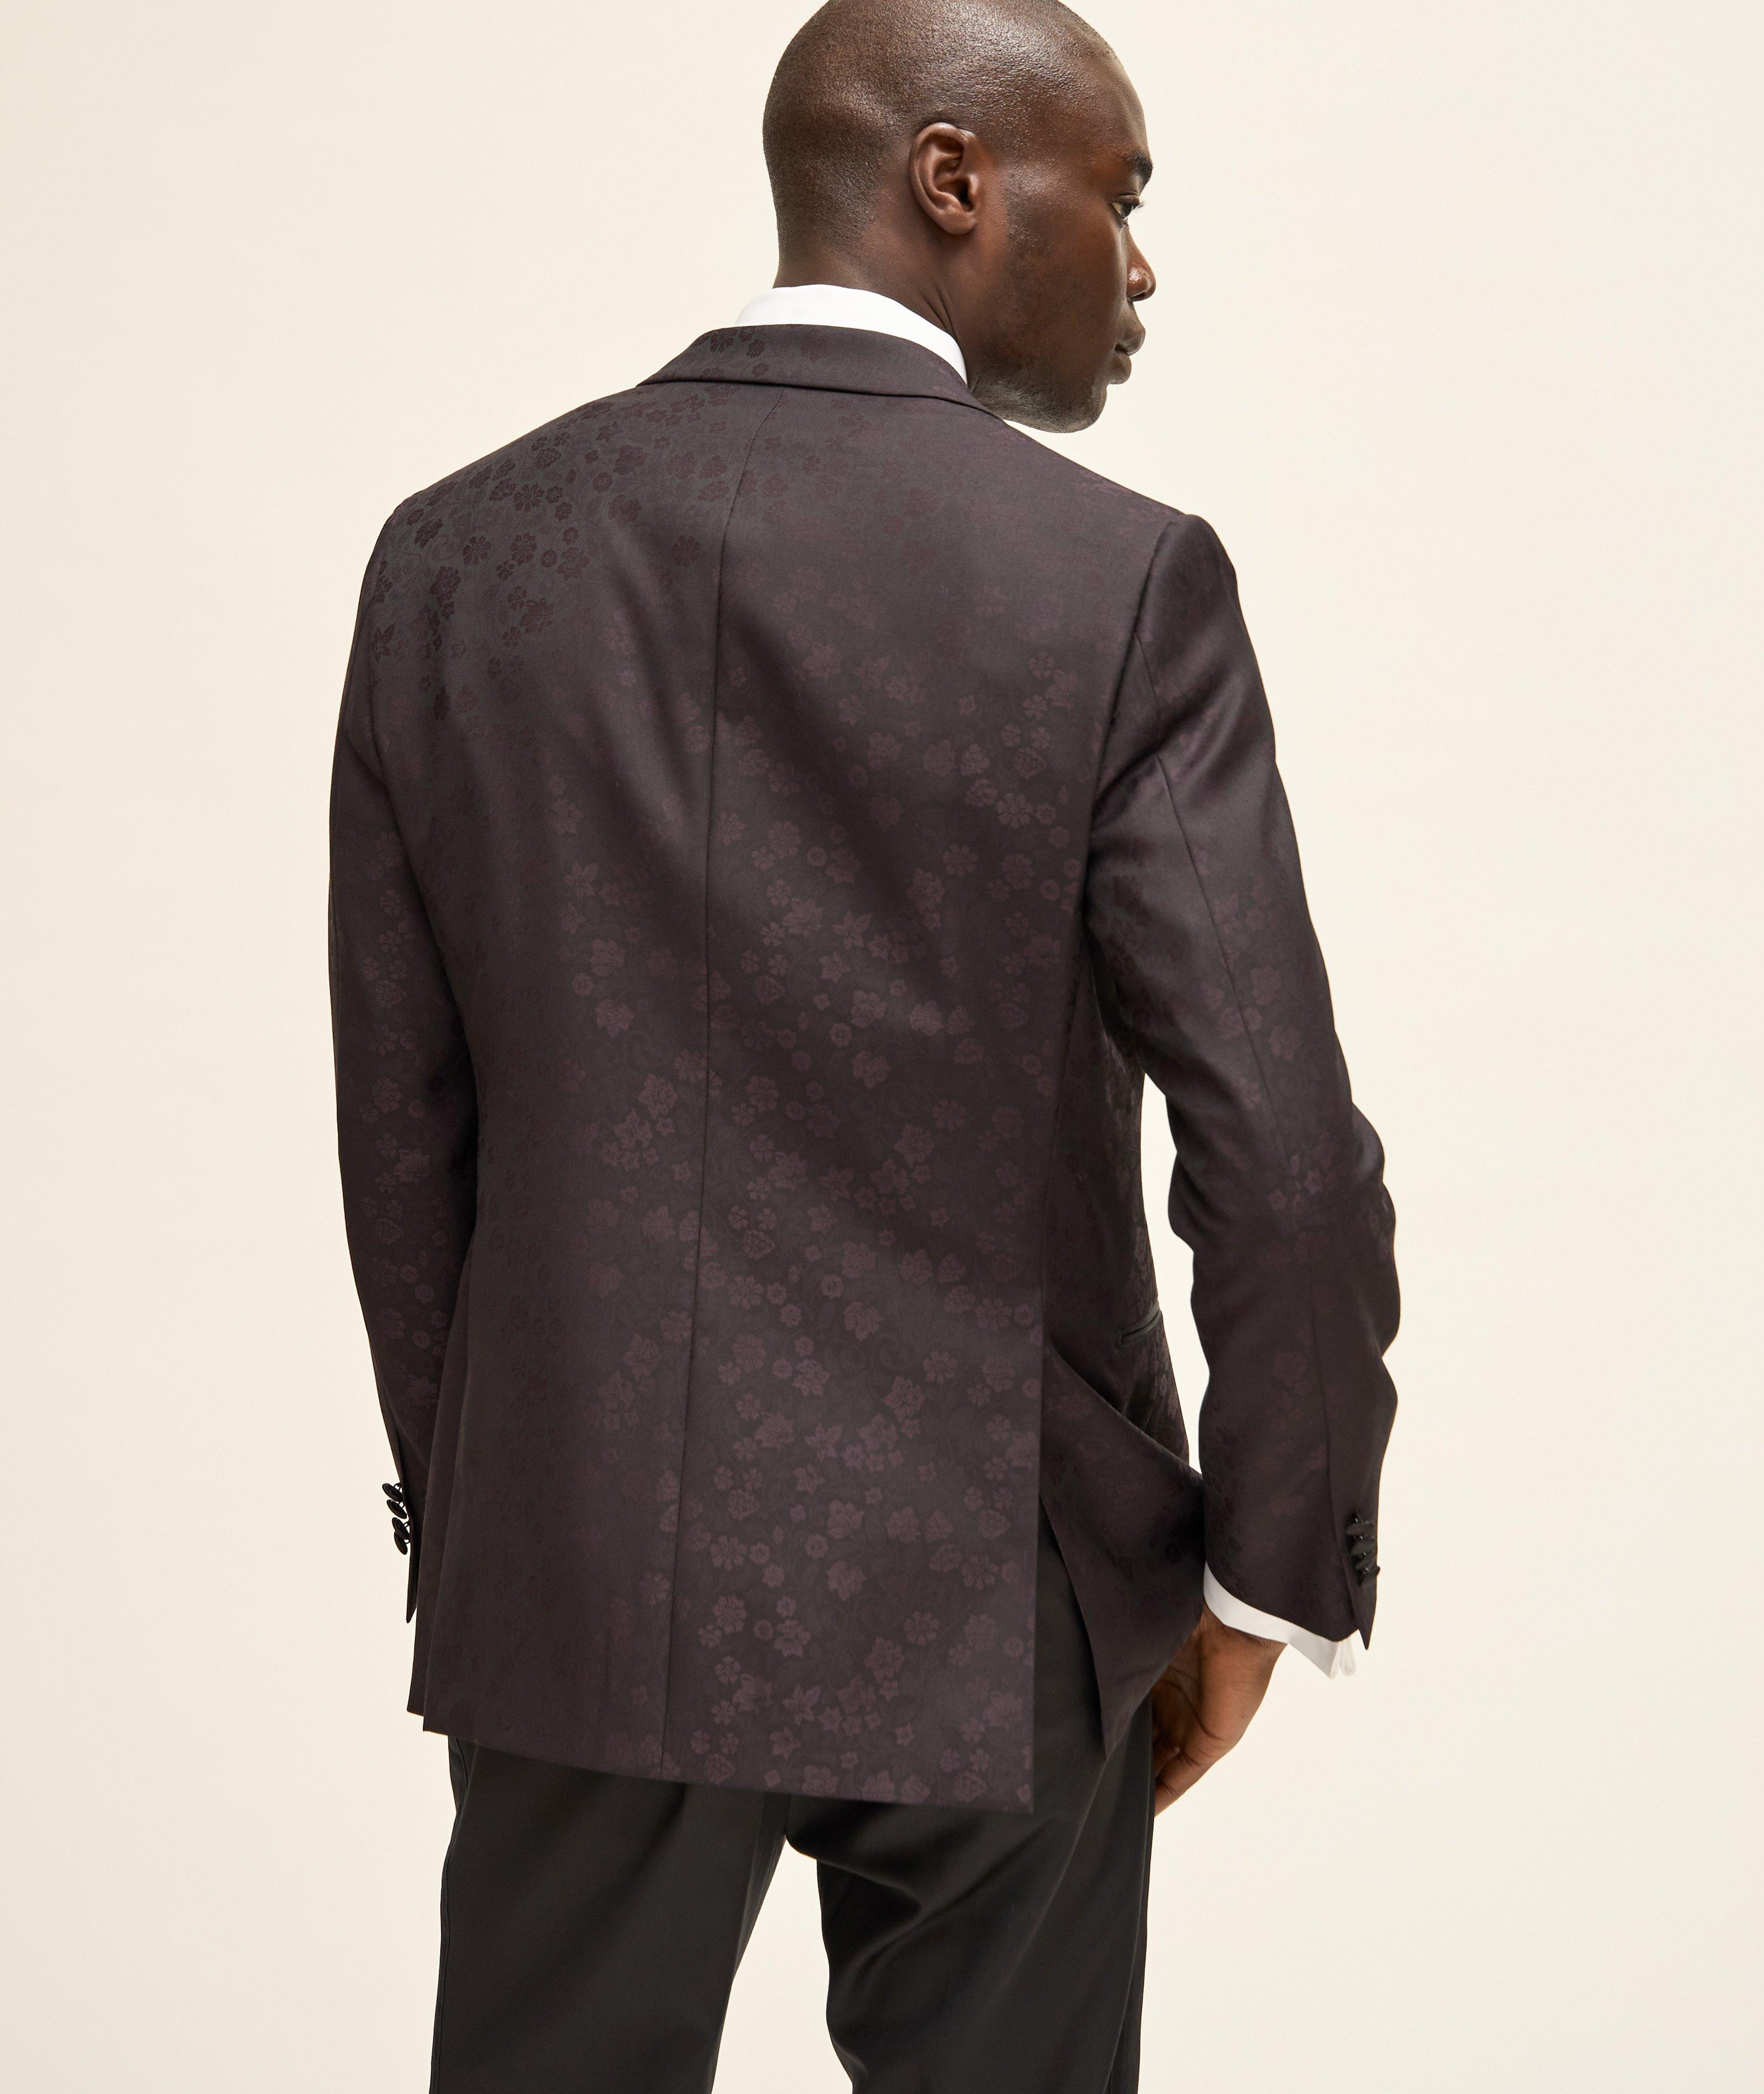 The New Formal Floral Wool Cocktail Jacket image 2